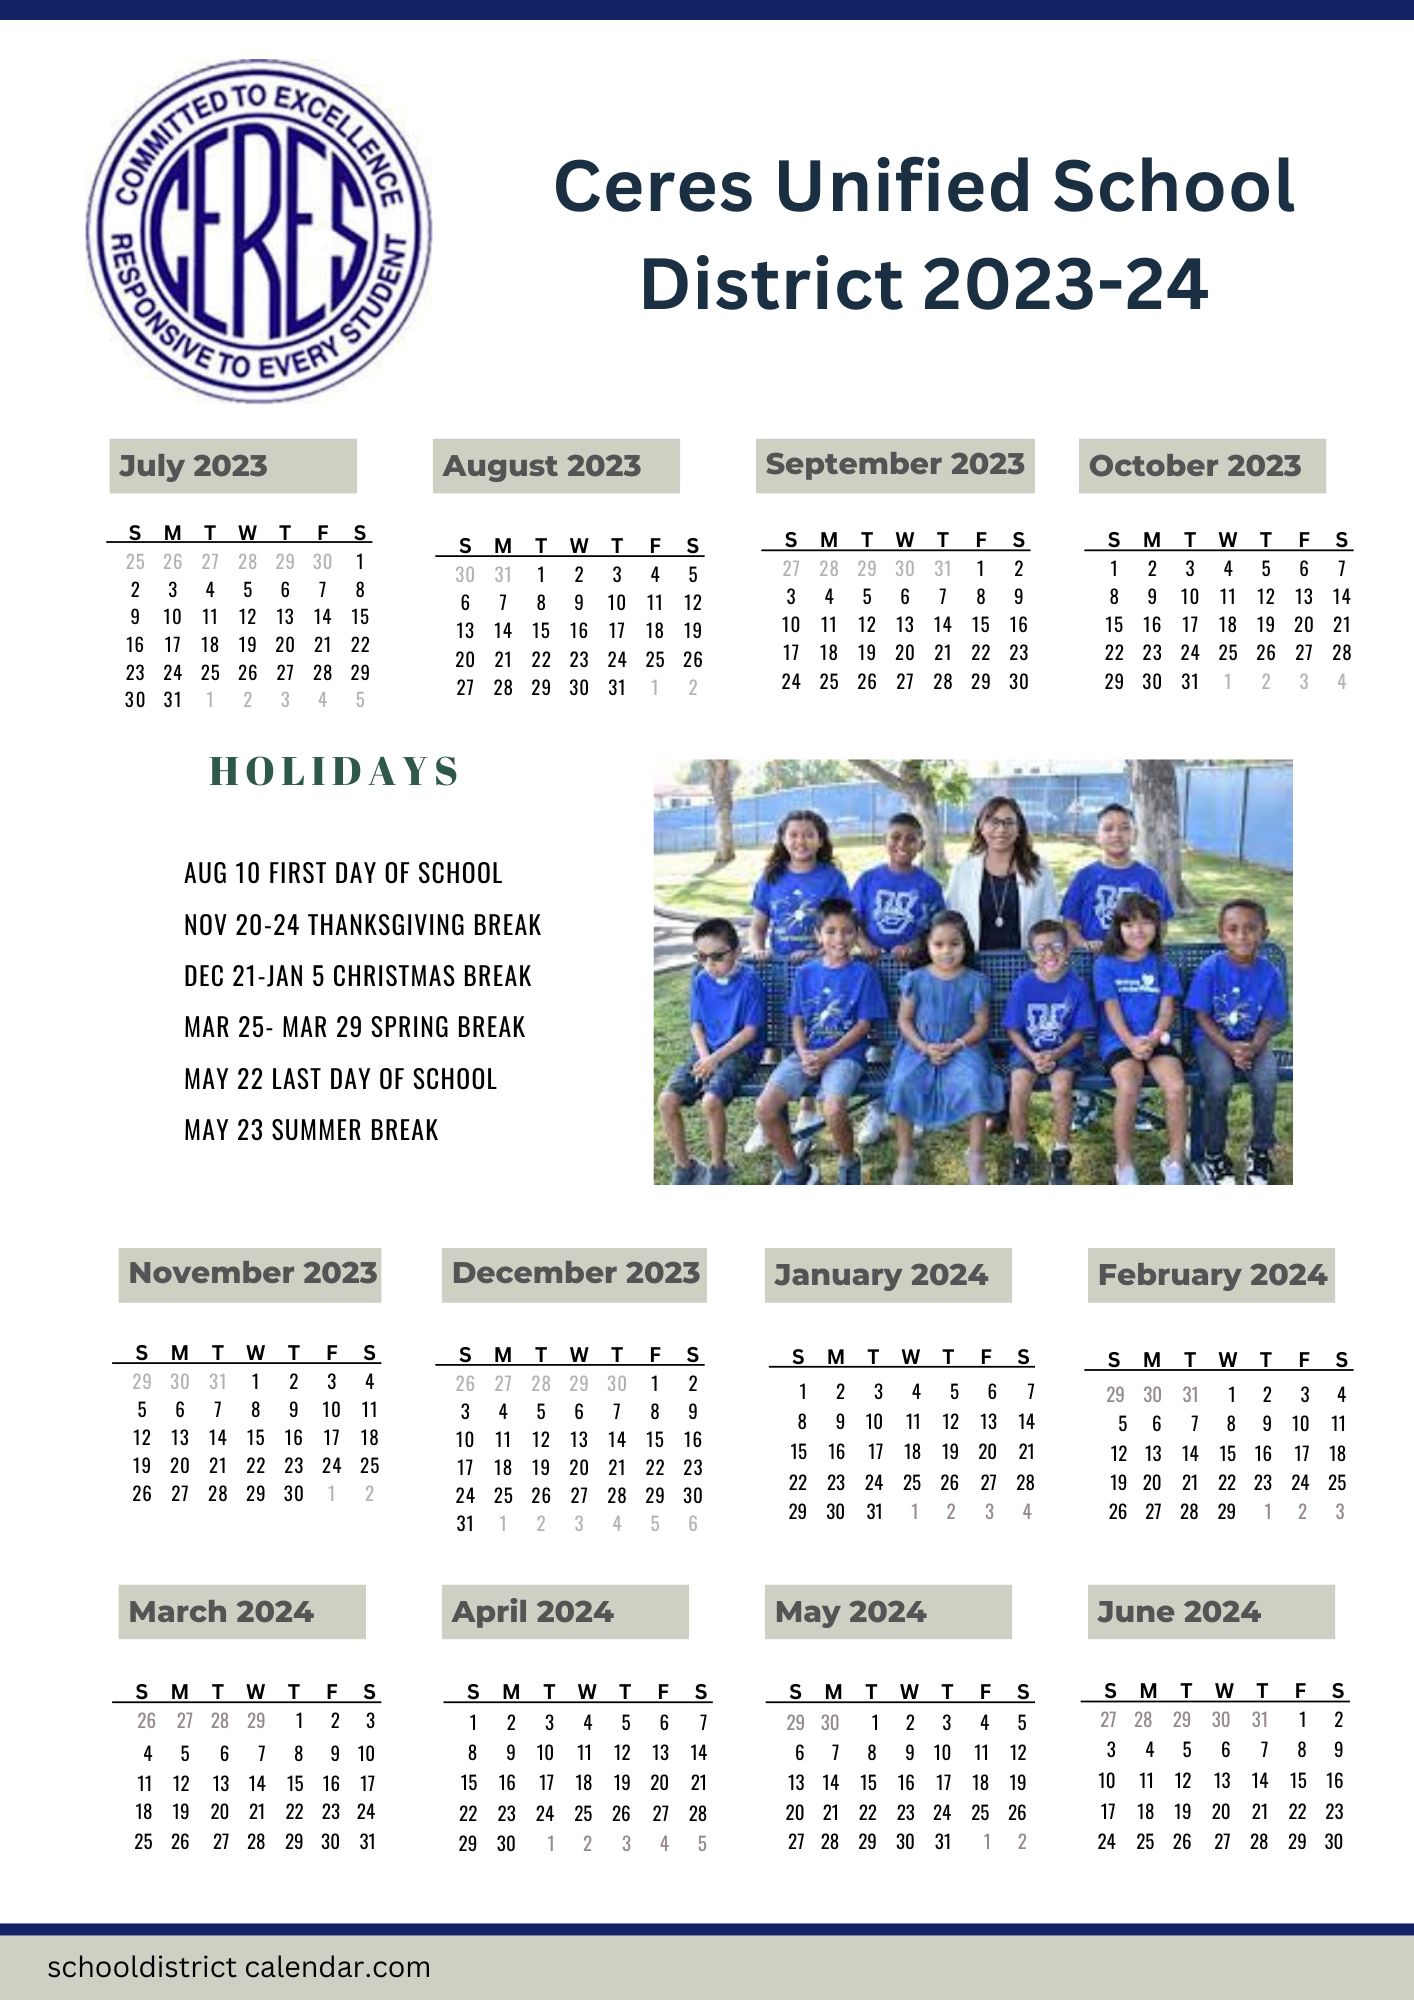 ceres-unified-school-district-calendar-holidays-2023-2024